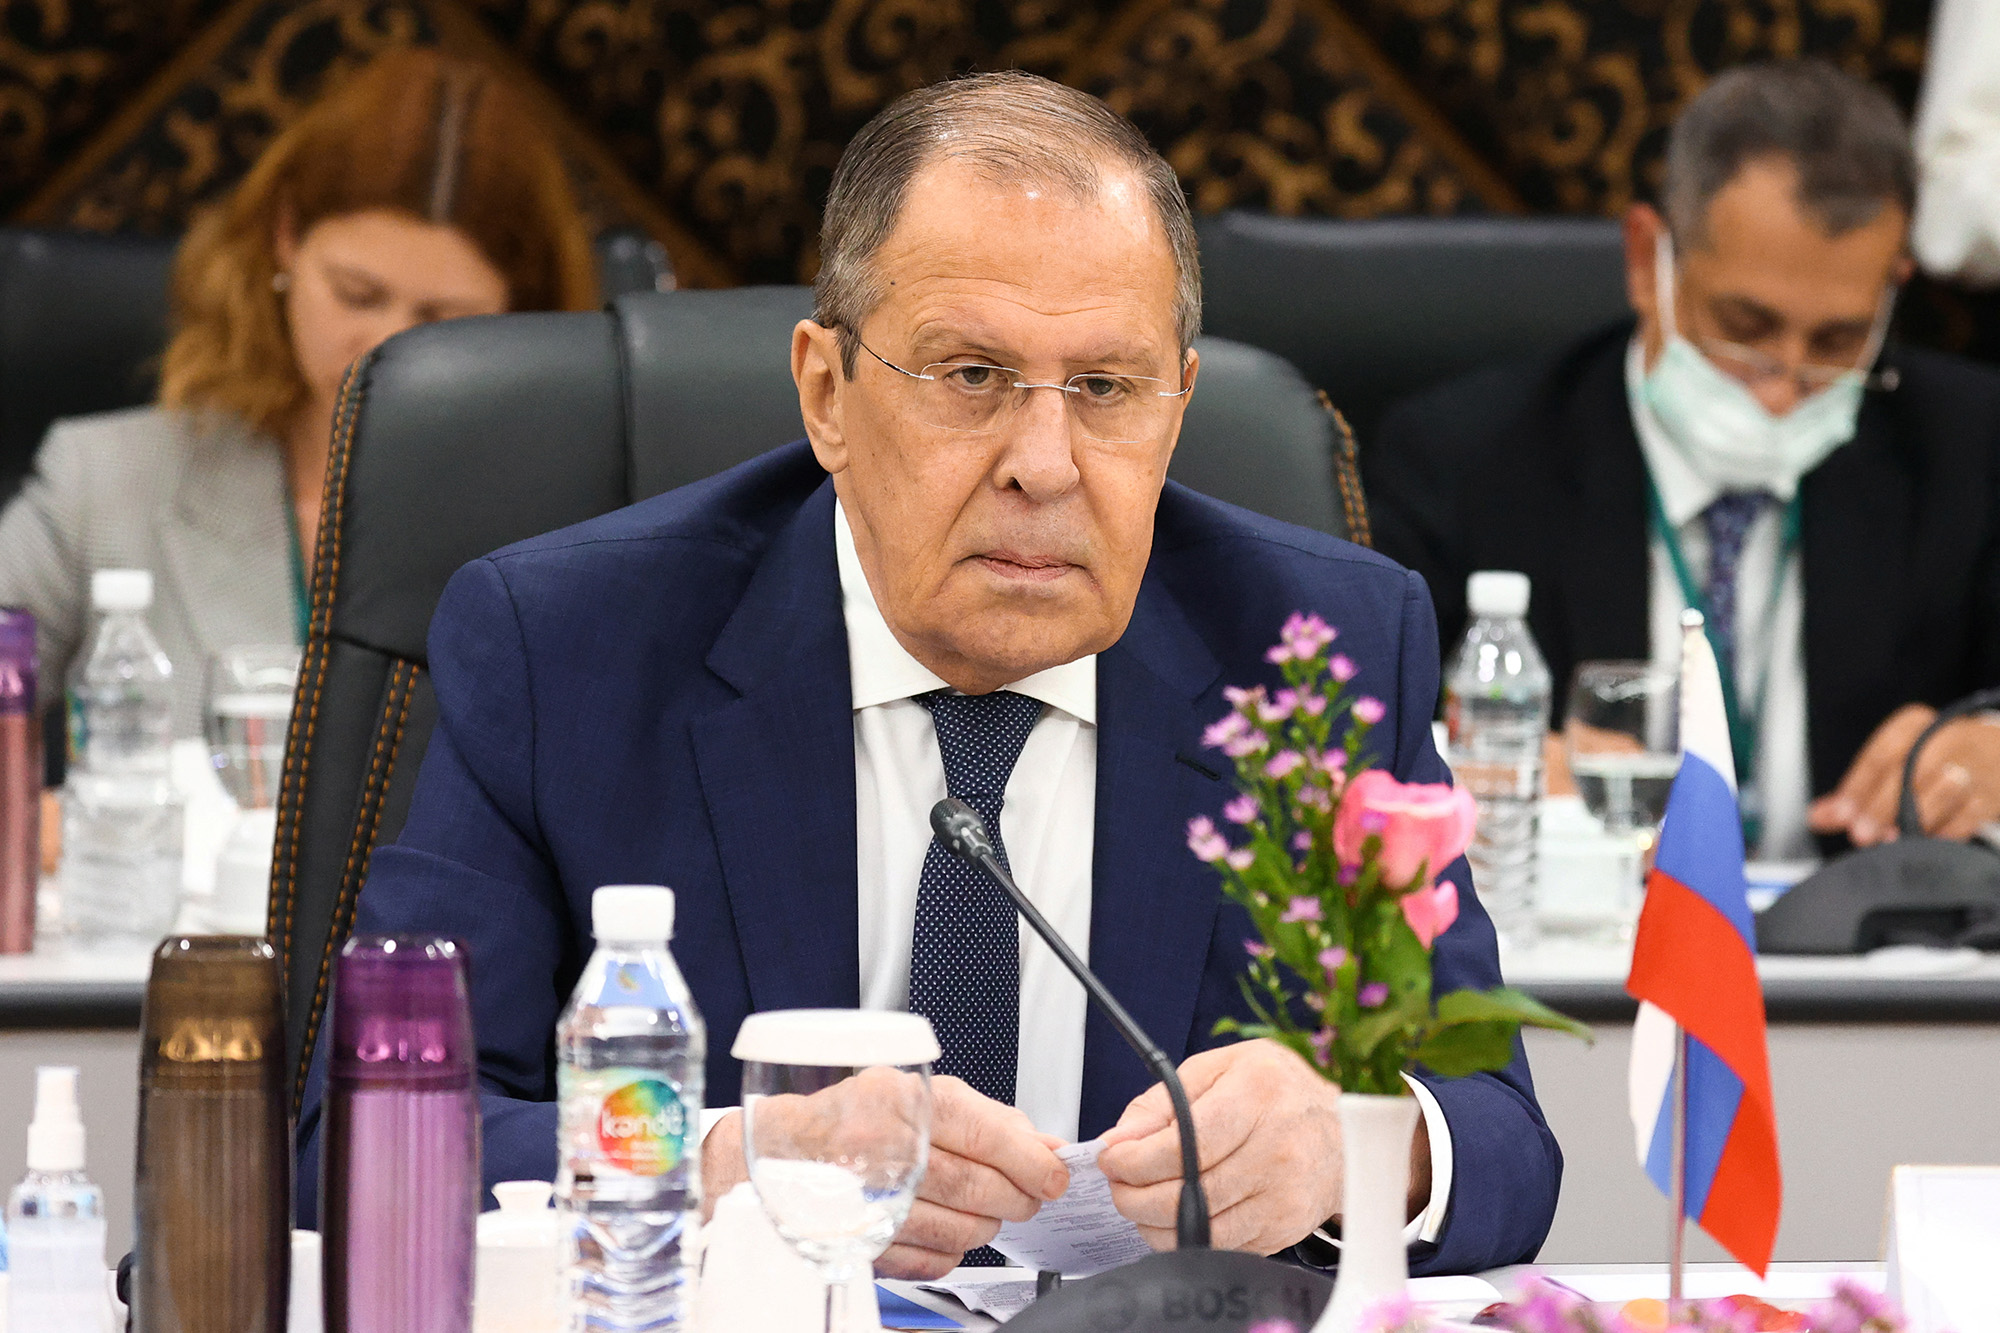 Russia's Foreign Minister Sergey Lavrov attends a meeting with Myanmar's Foreign Minister Wunna Maung Lwin in Naypyidaw, Myanmar, on August 3.